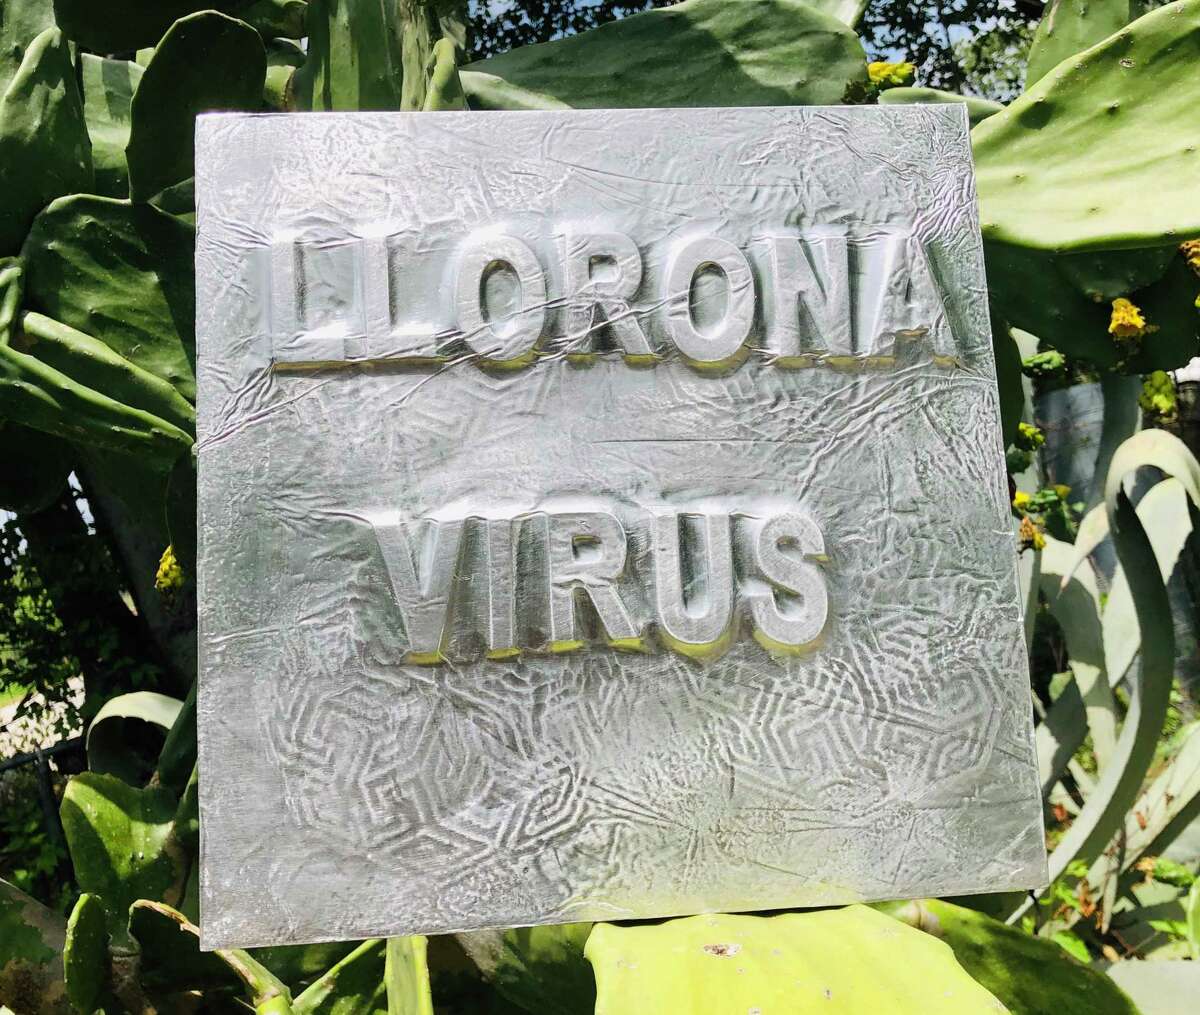 "Llorona Virus" by San Antonio artist Jose Chapa, who specializes in embossed metal work. Chapa created the work as a nod to the pandemic and 2020.